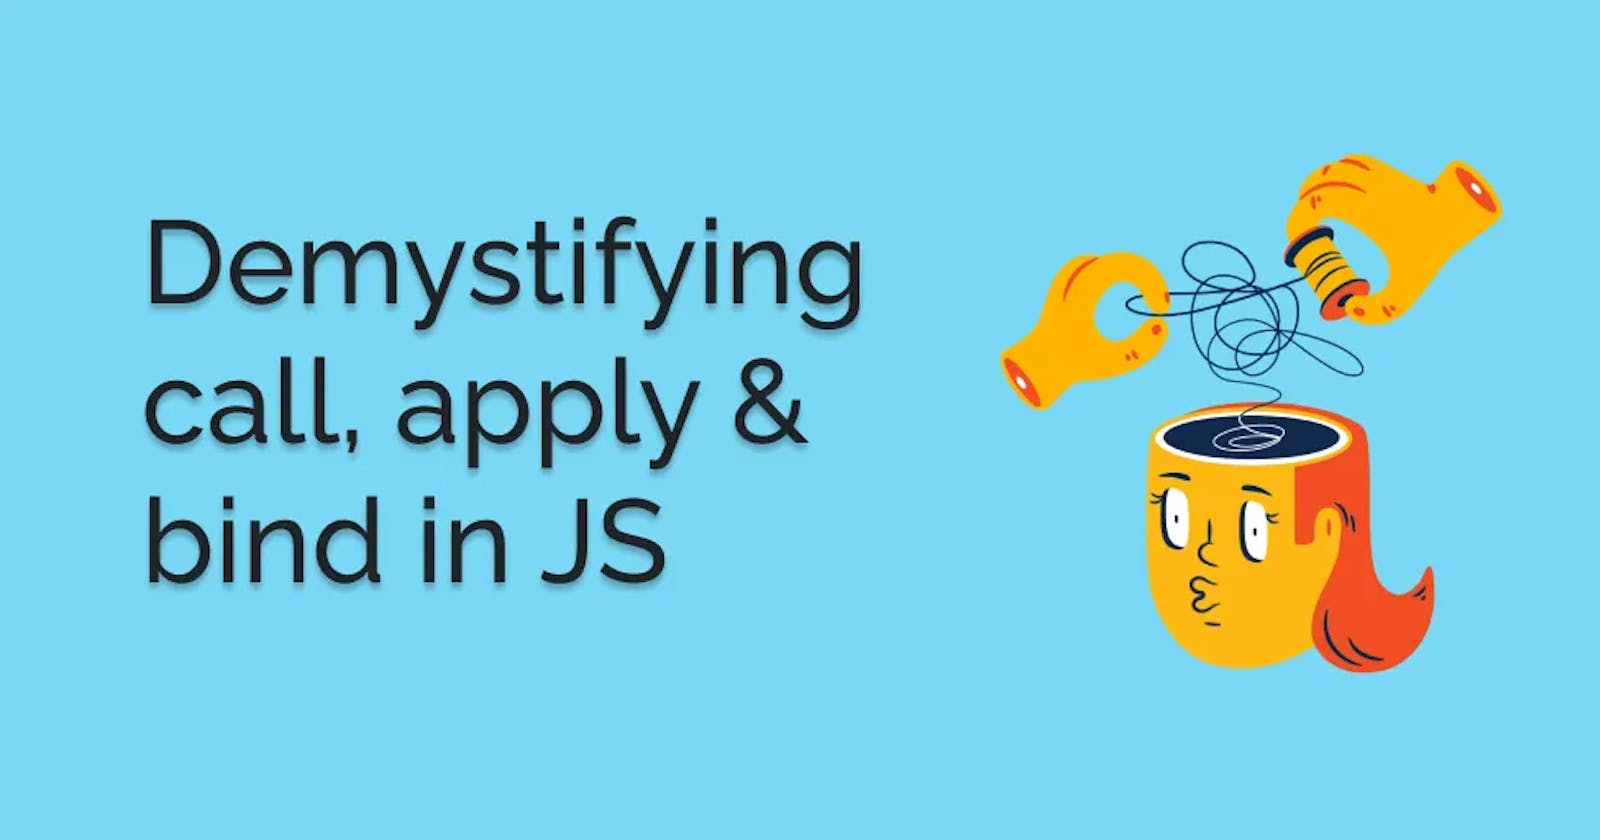 How easy it is to understand call, apply & bind in Javascript